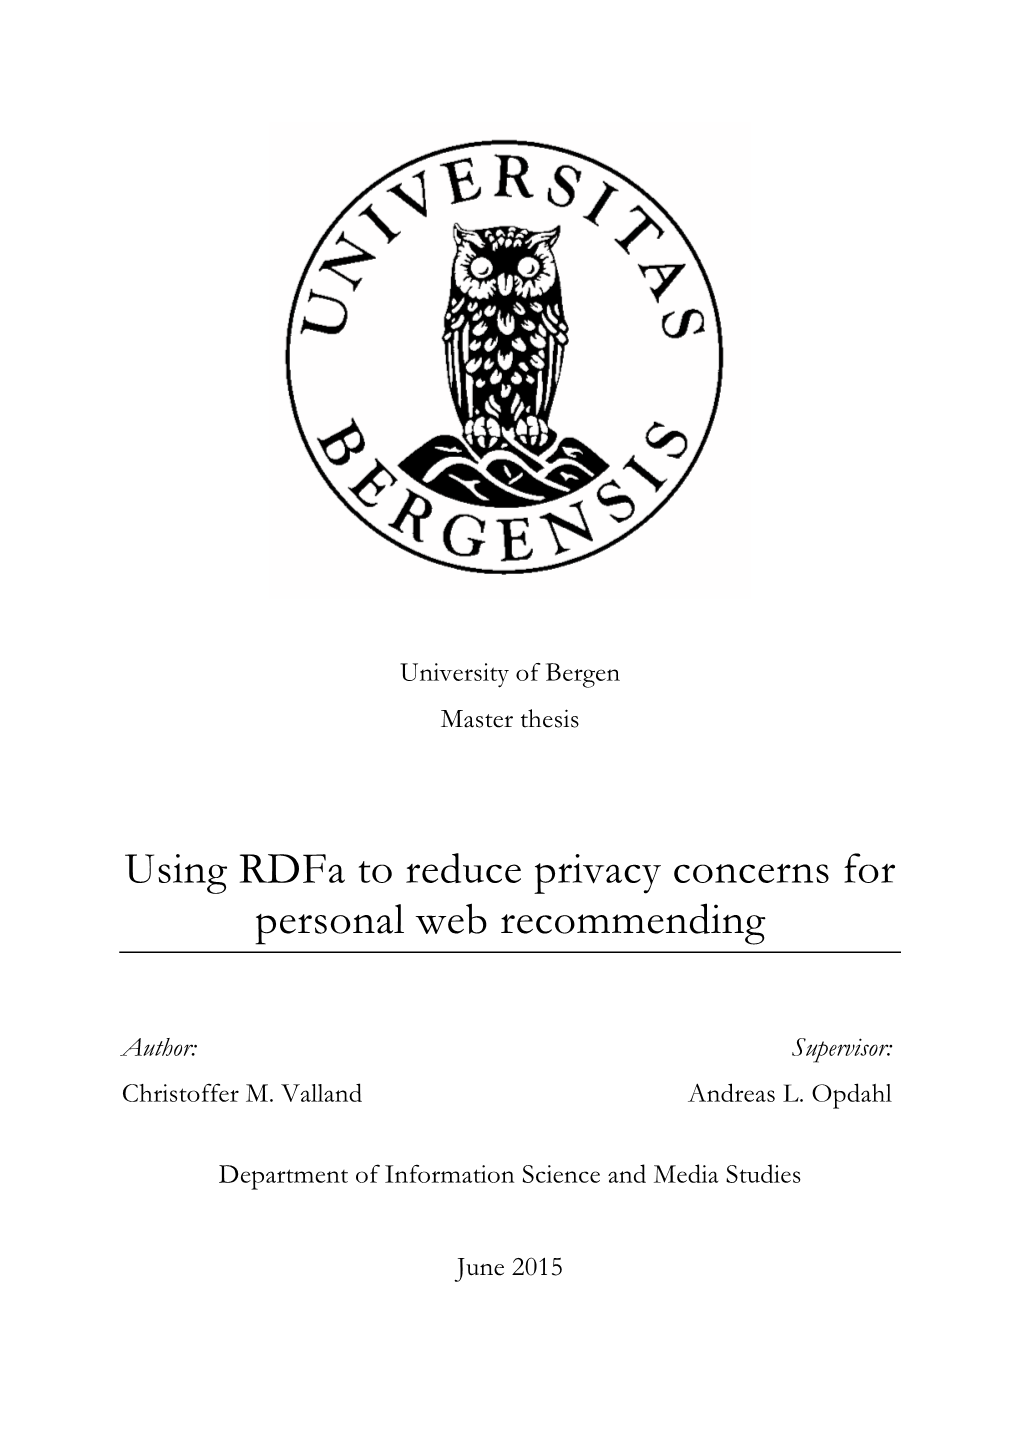 Using Rdfa to Reduce Privacy Concerns for Personal Web Recommending